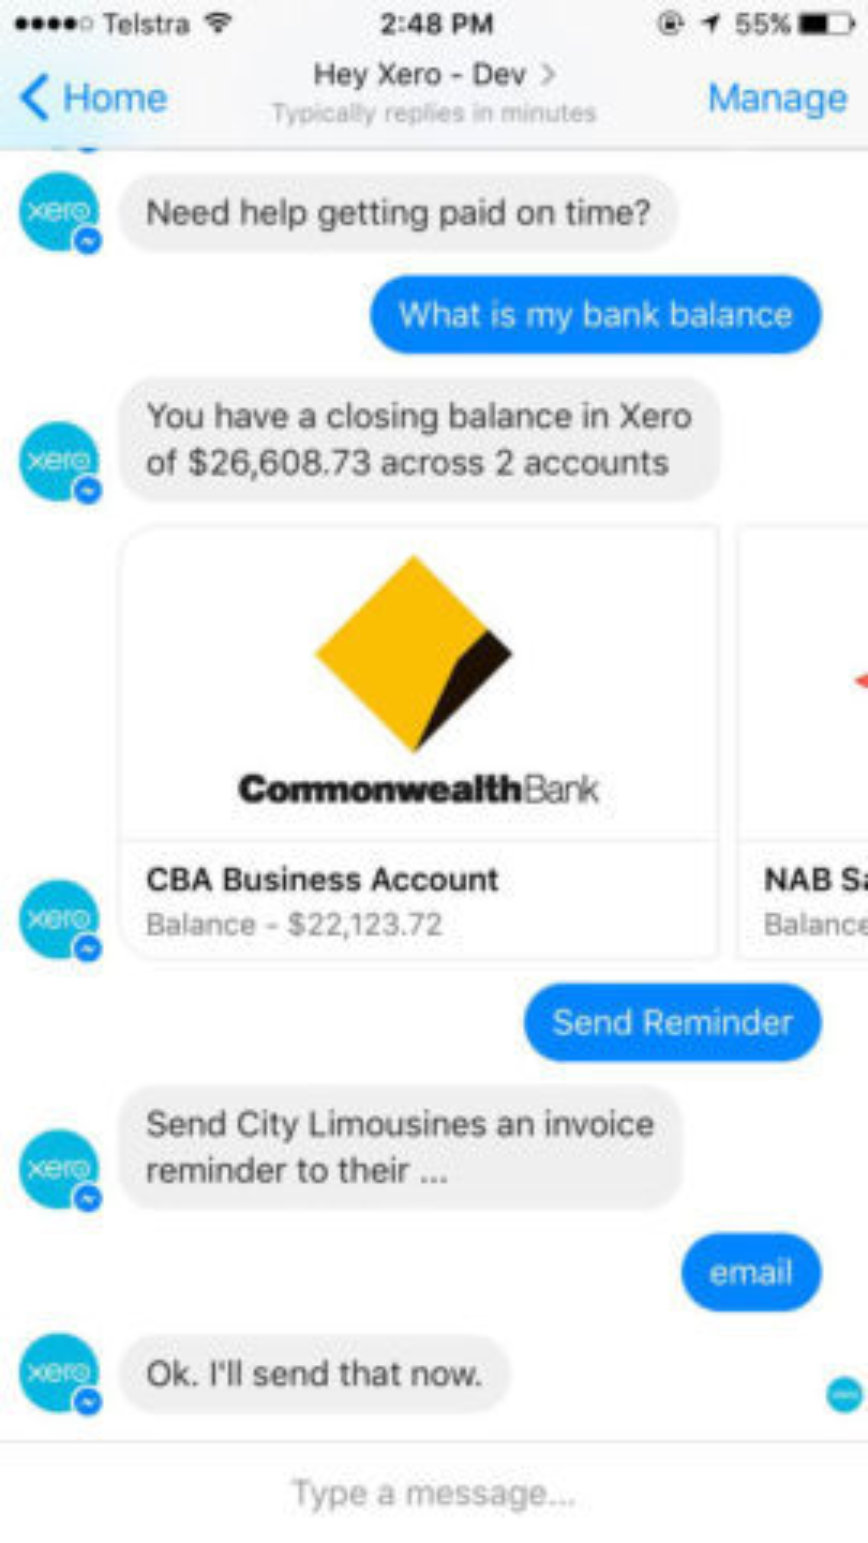 Xero Tip What S Coming Growthwise